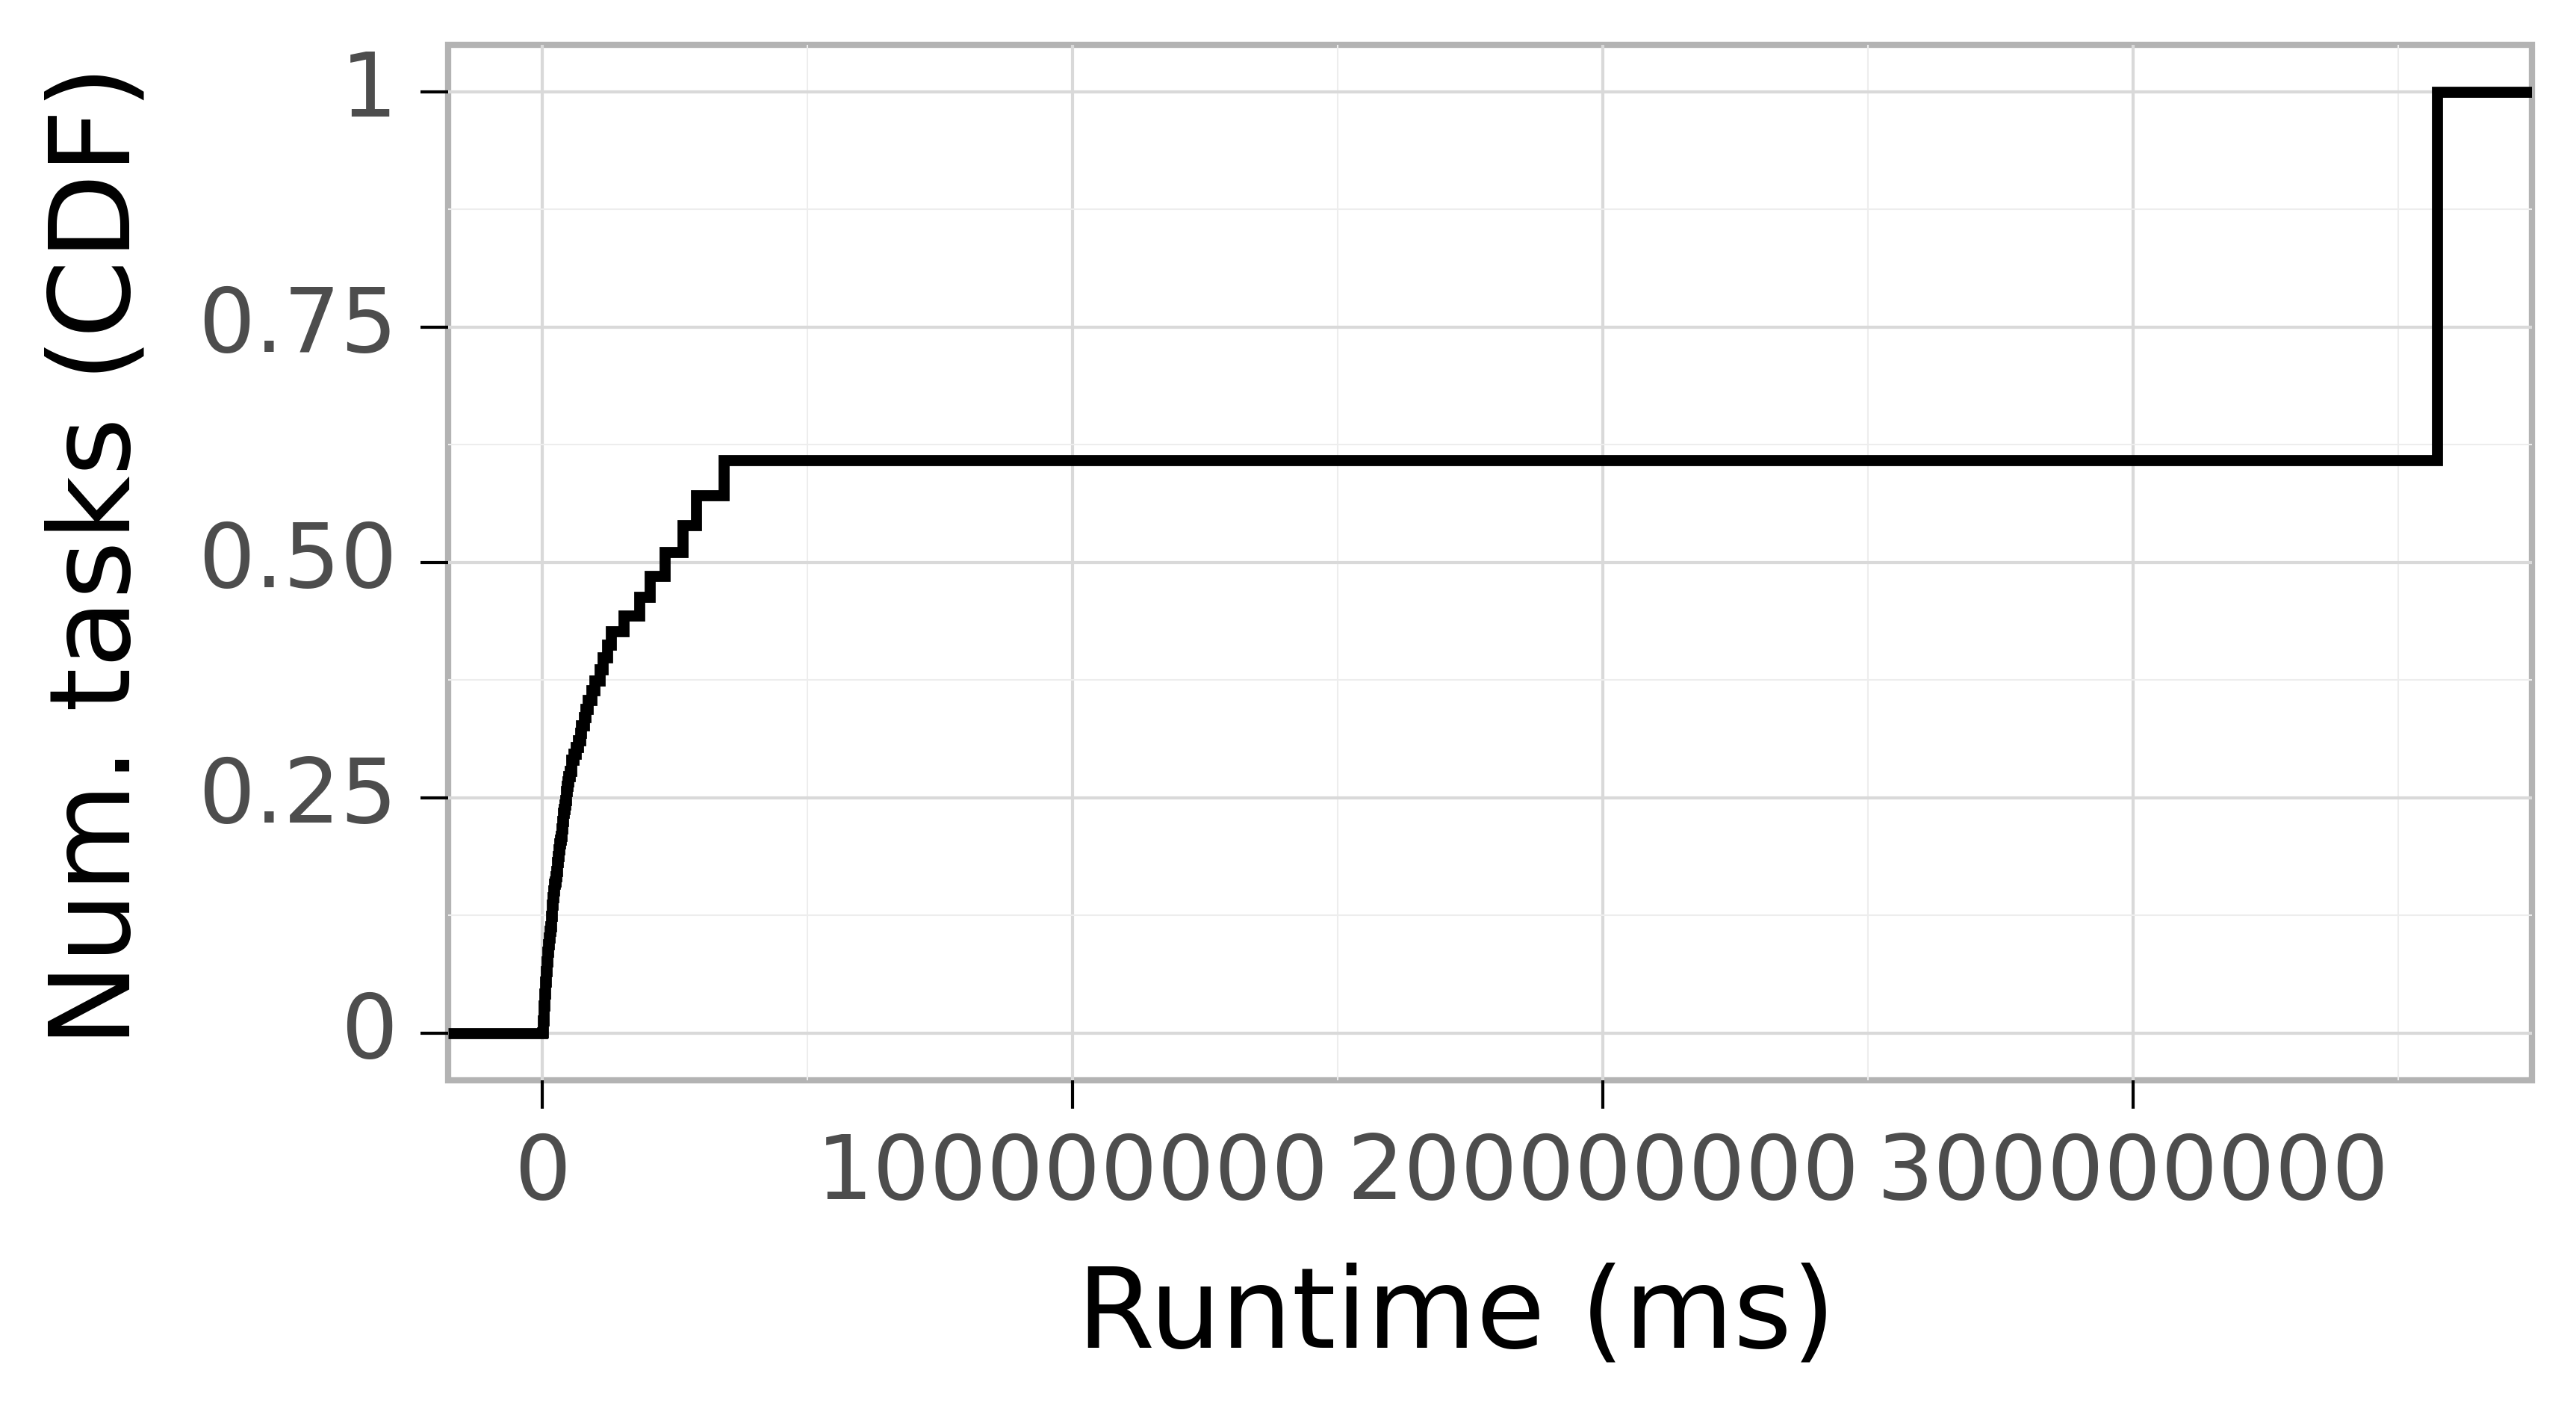 Task runtime CDF graph for the Galaxy trace.